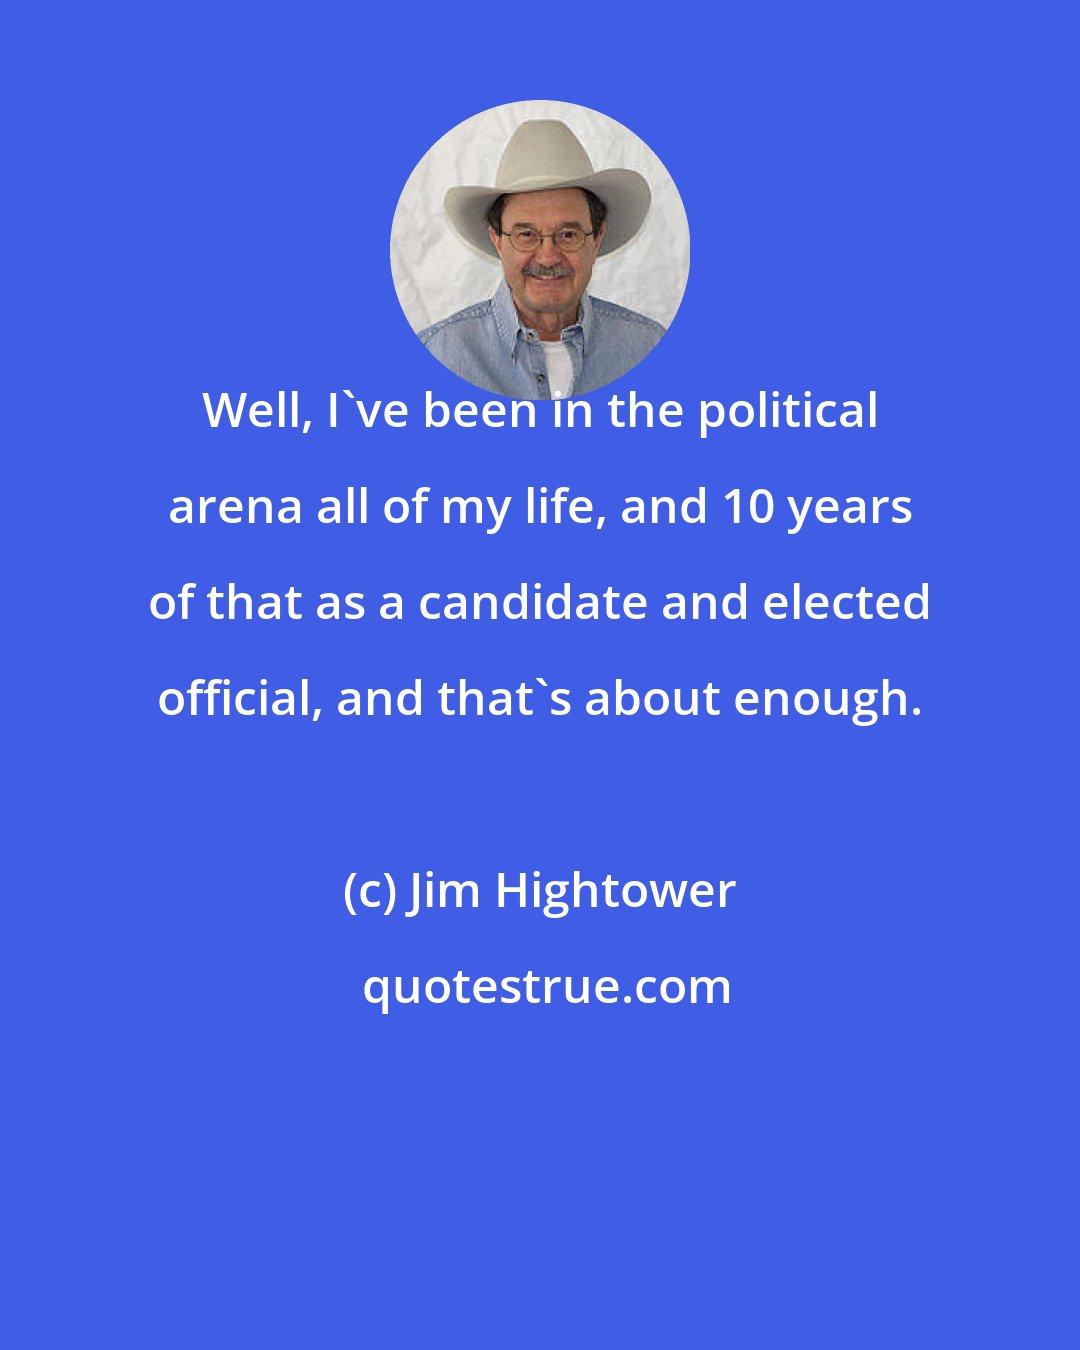 Jim Hightower: Well, I've been in the political arena all of my life, and 10 years of that as a candidate and elected official, and that's about enough.